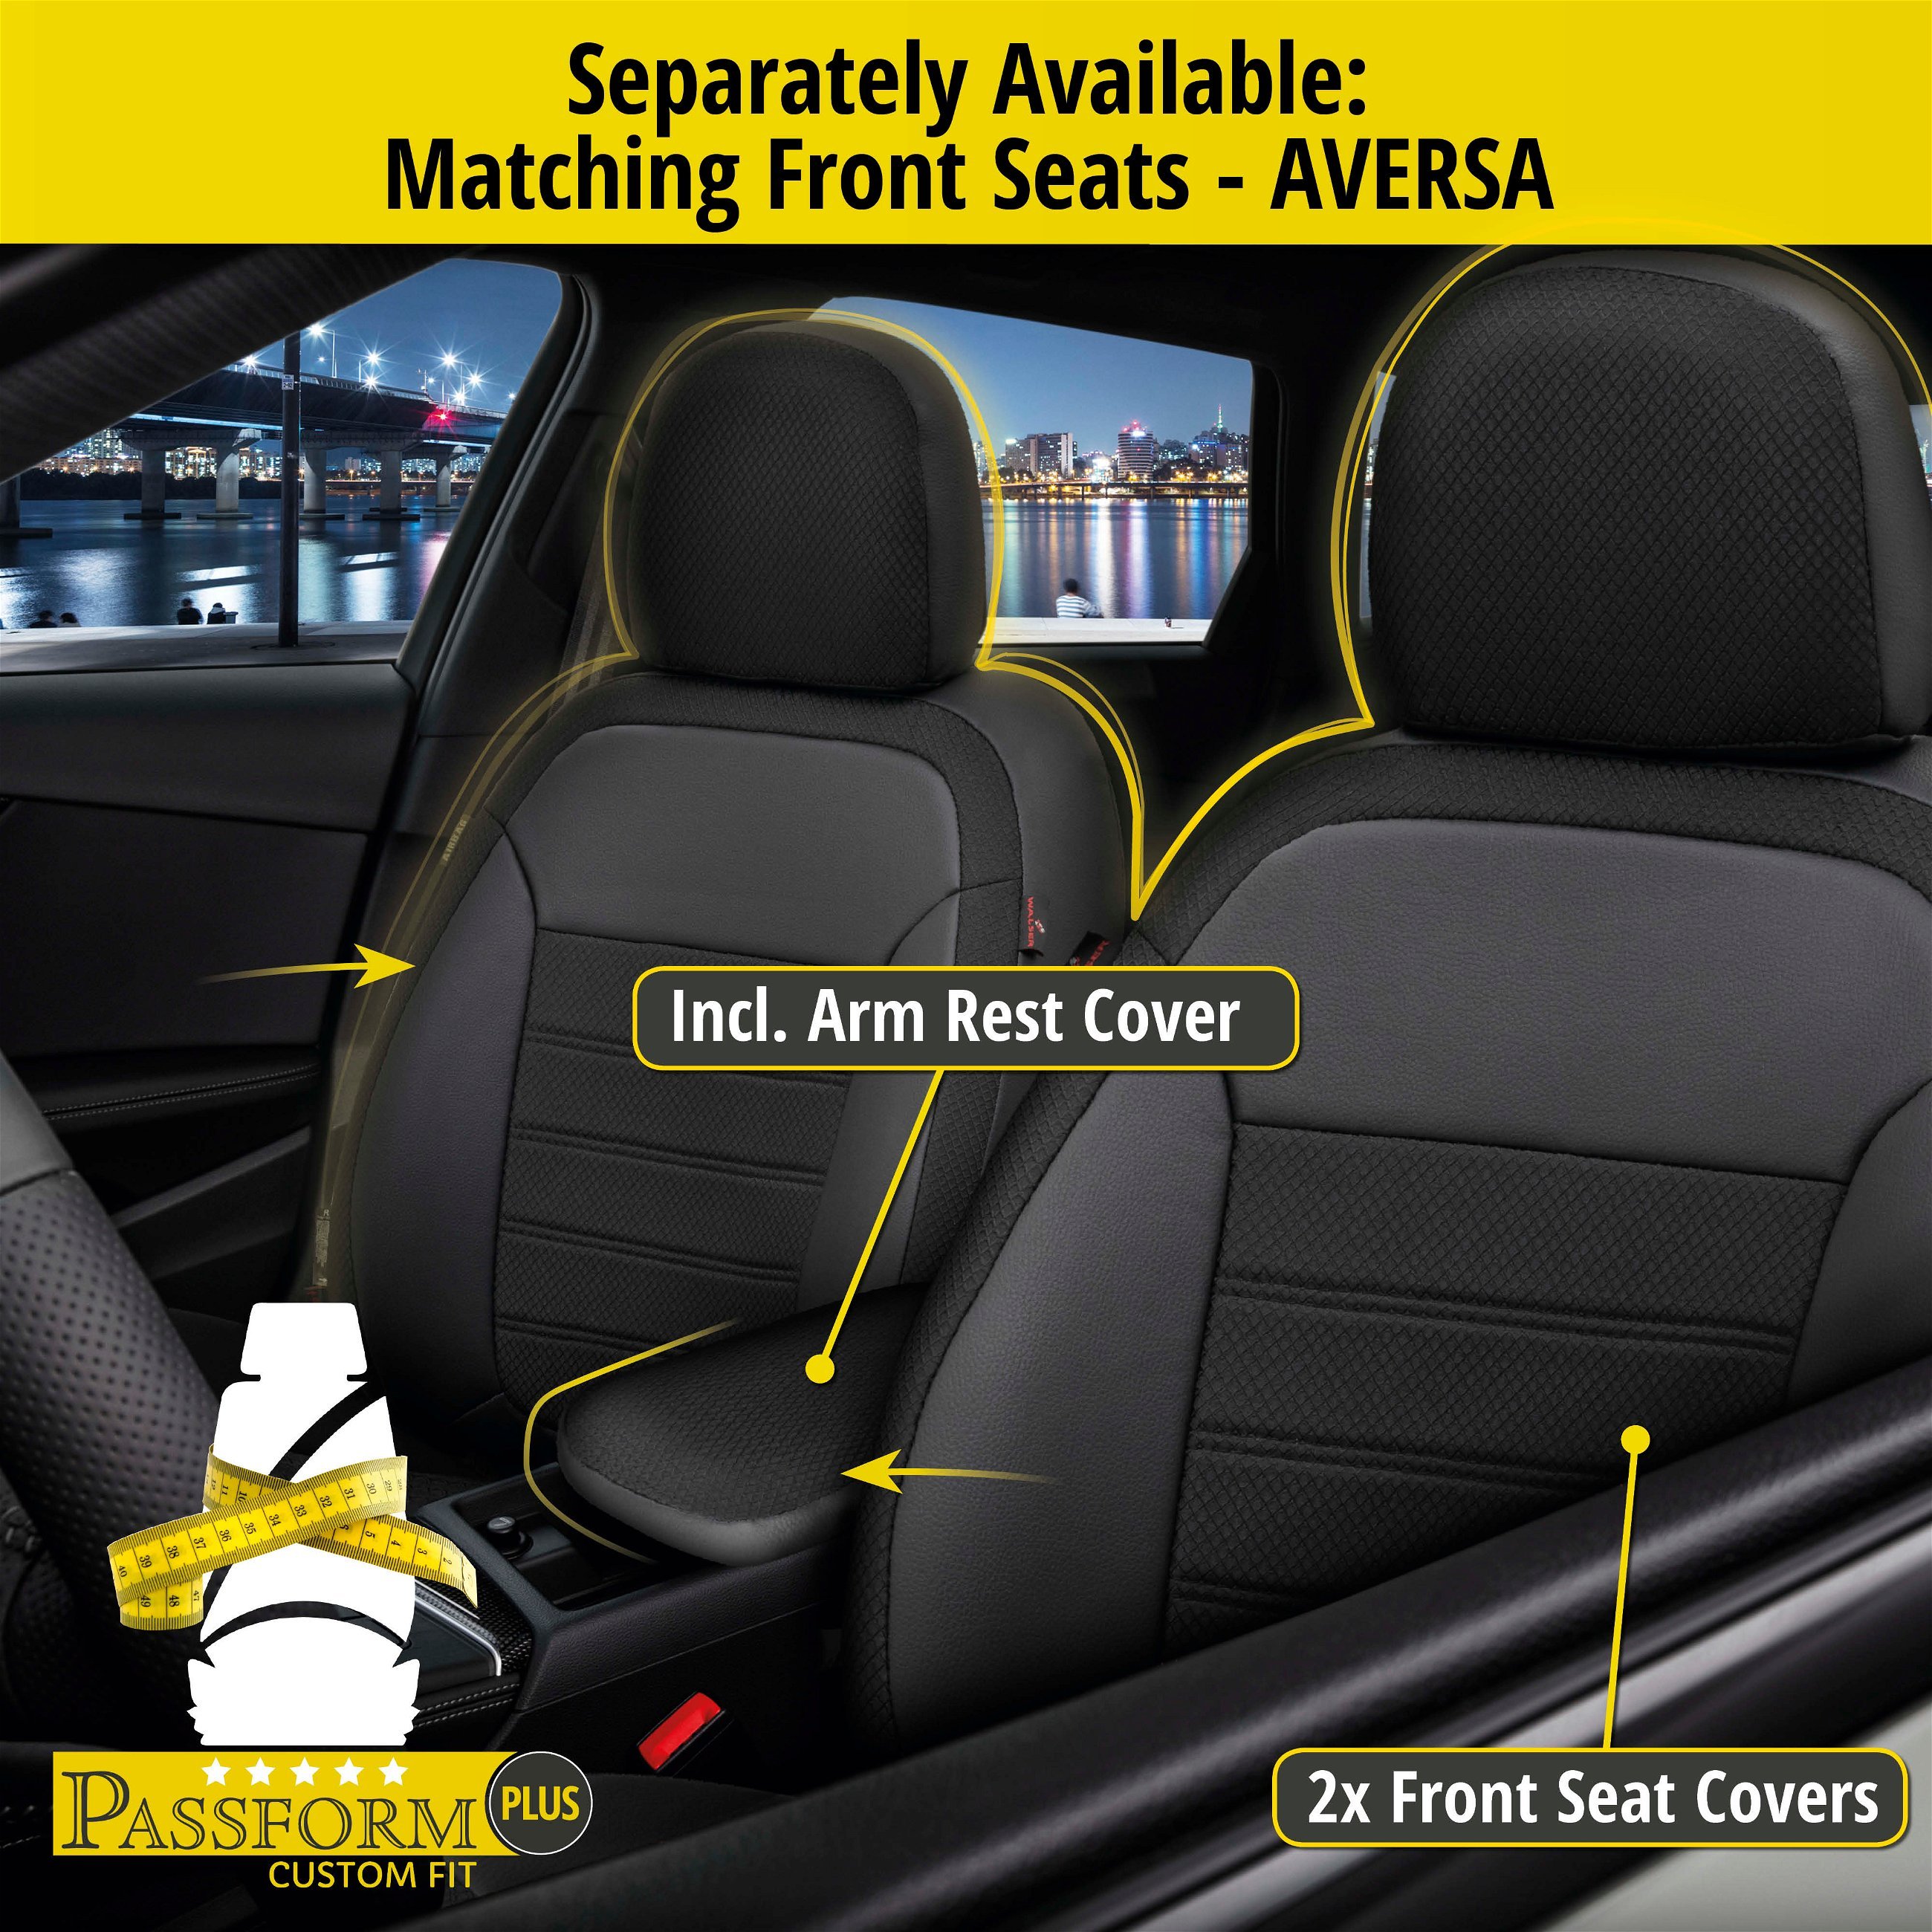 Seat Cover Aversa for VW Golf V (1K1) 10/2003-07/2010, 1 rear seat cover for normal seats